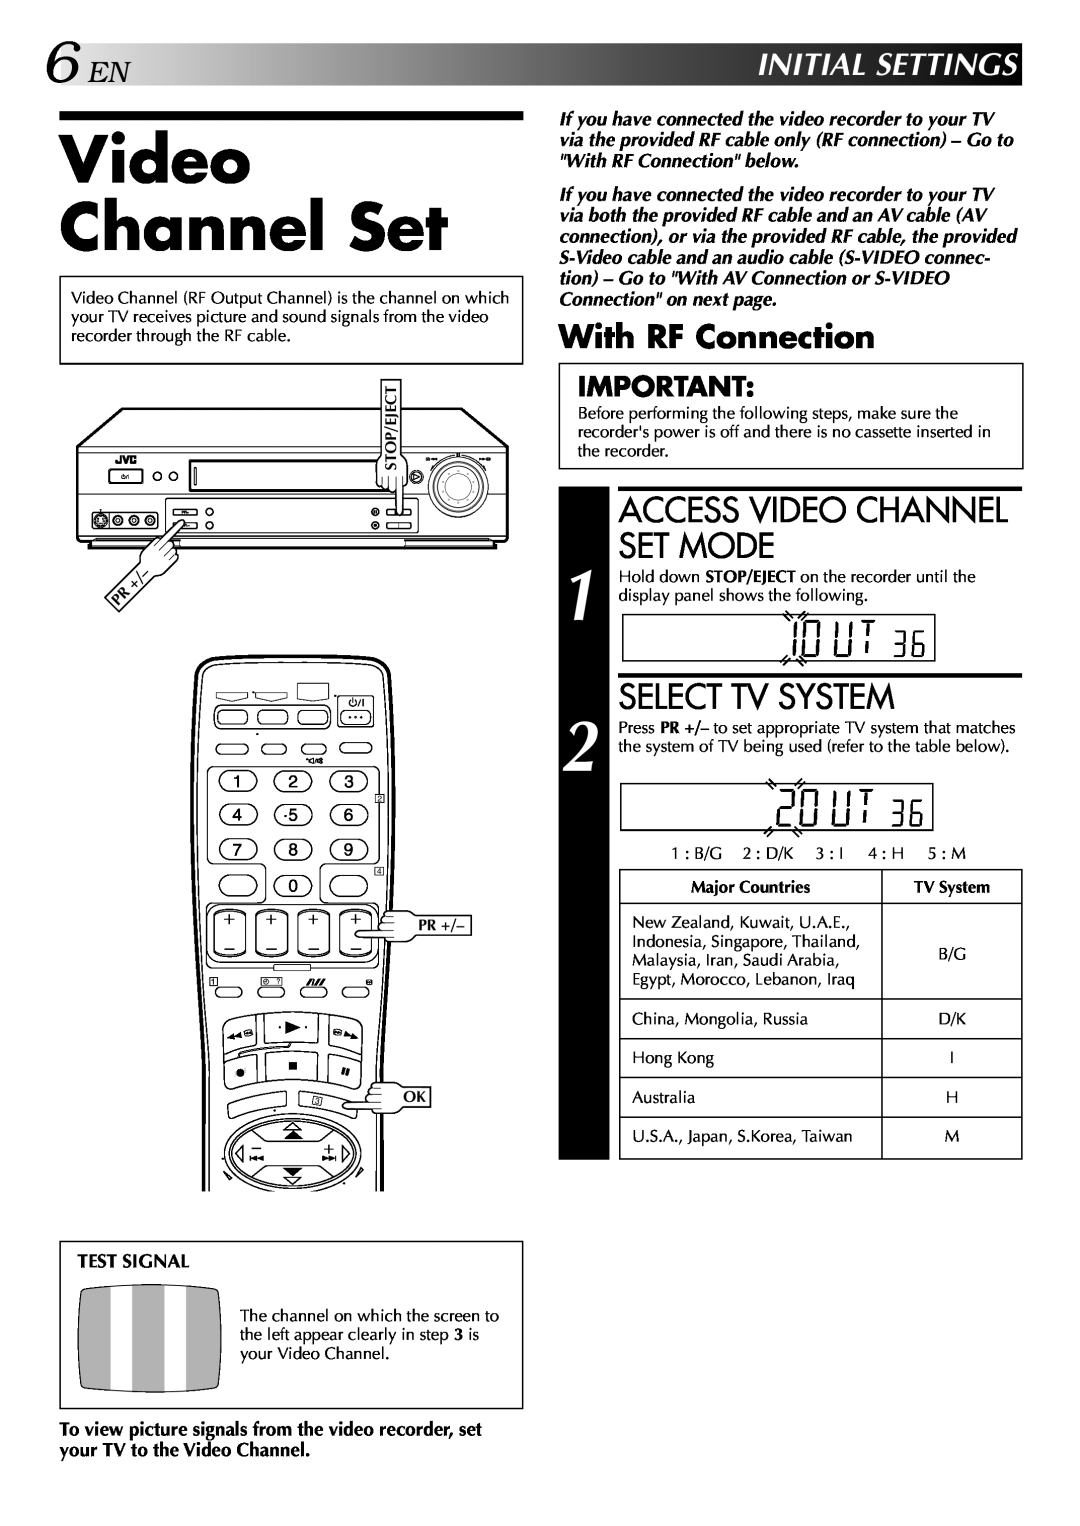 JVC HR-S5700AM, LPT0428-001A Access Video Channel Set Mode, 6ENINITIALSETTINGS, With RF Connection, Select Tv System 